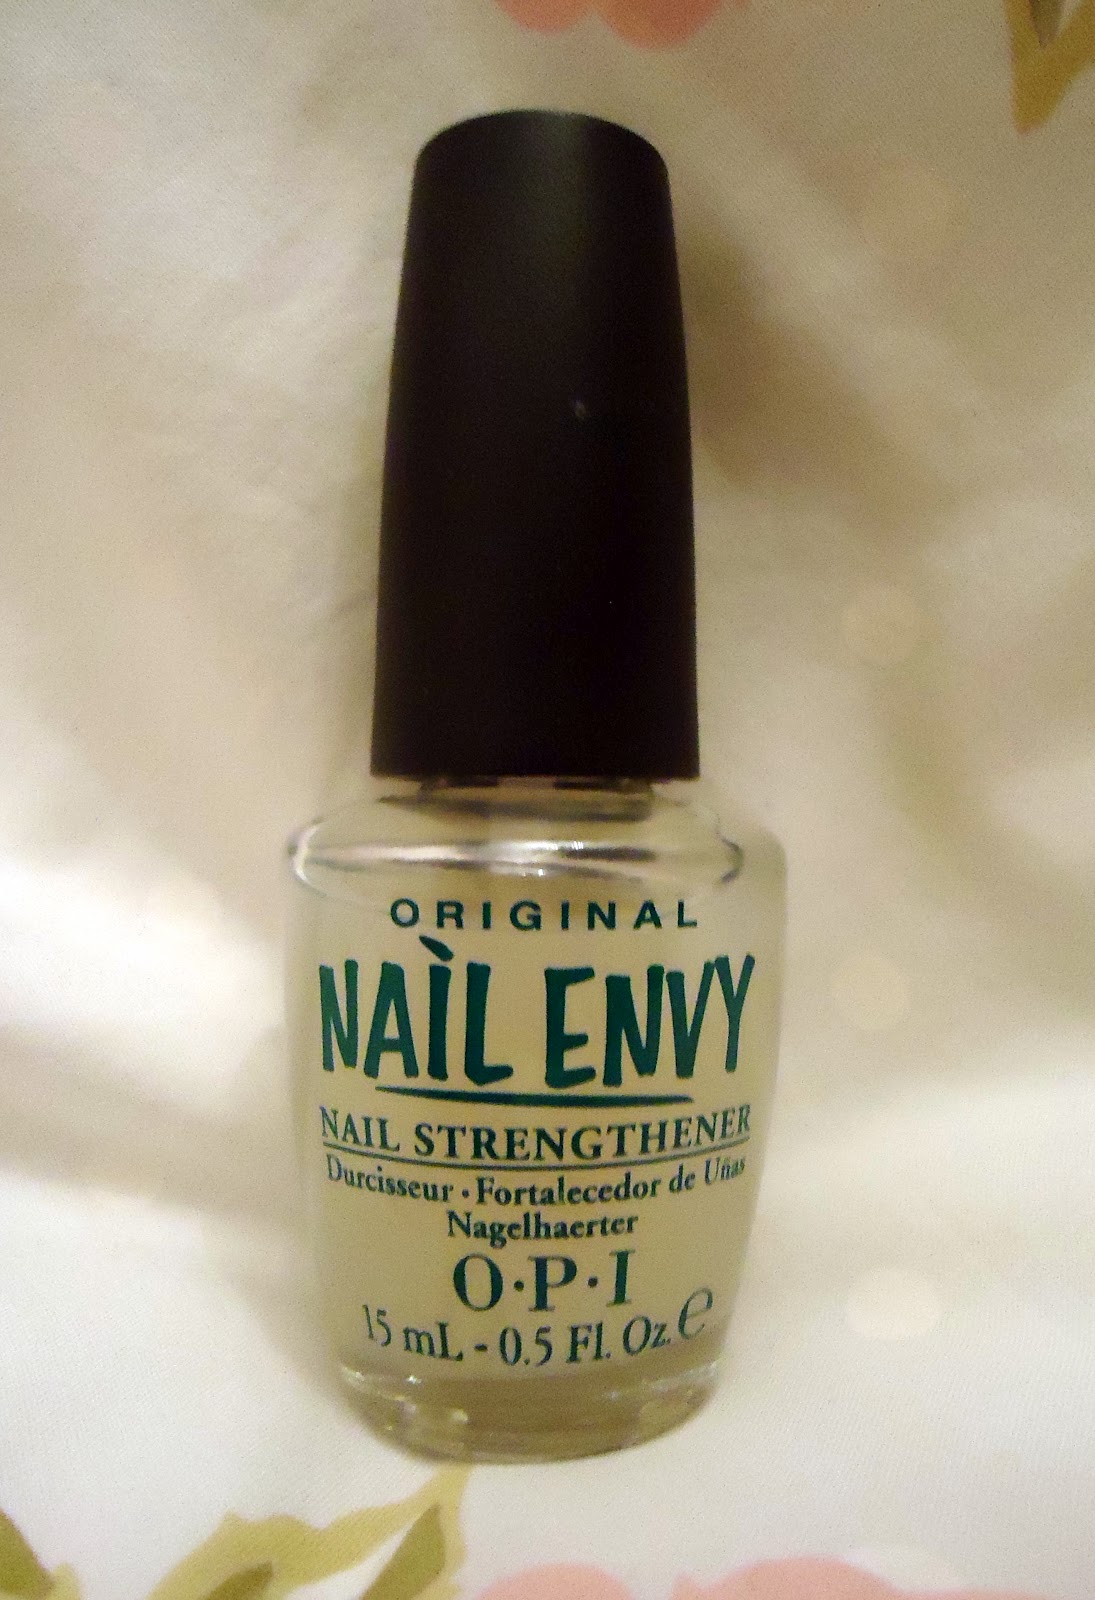 I was given this OPI Nail Envy as part of a pack that my mum got me for my